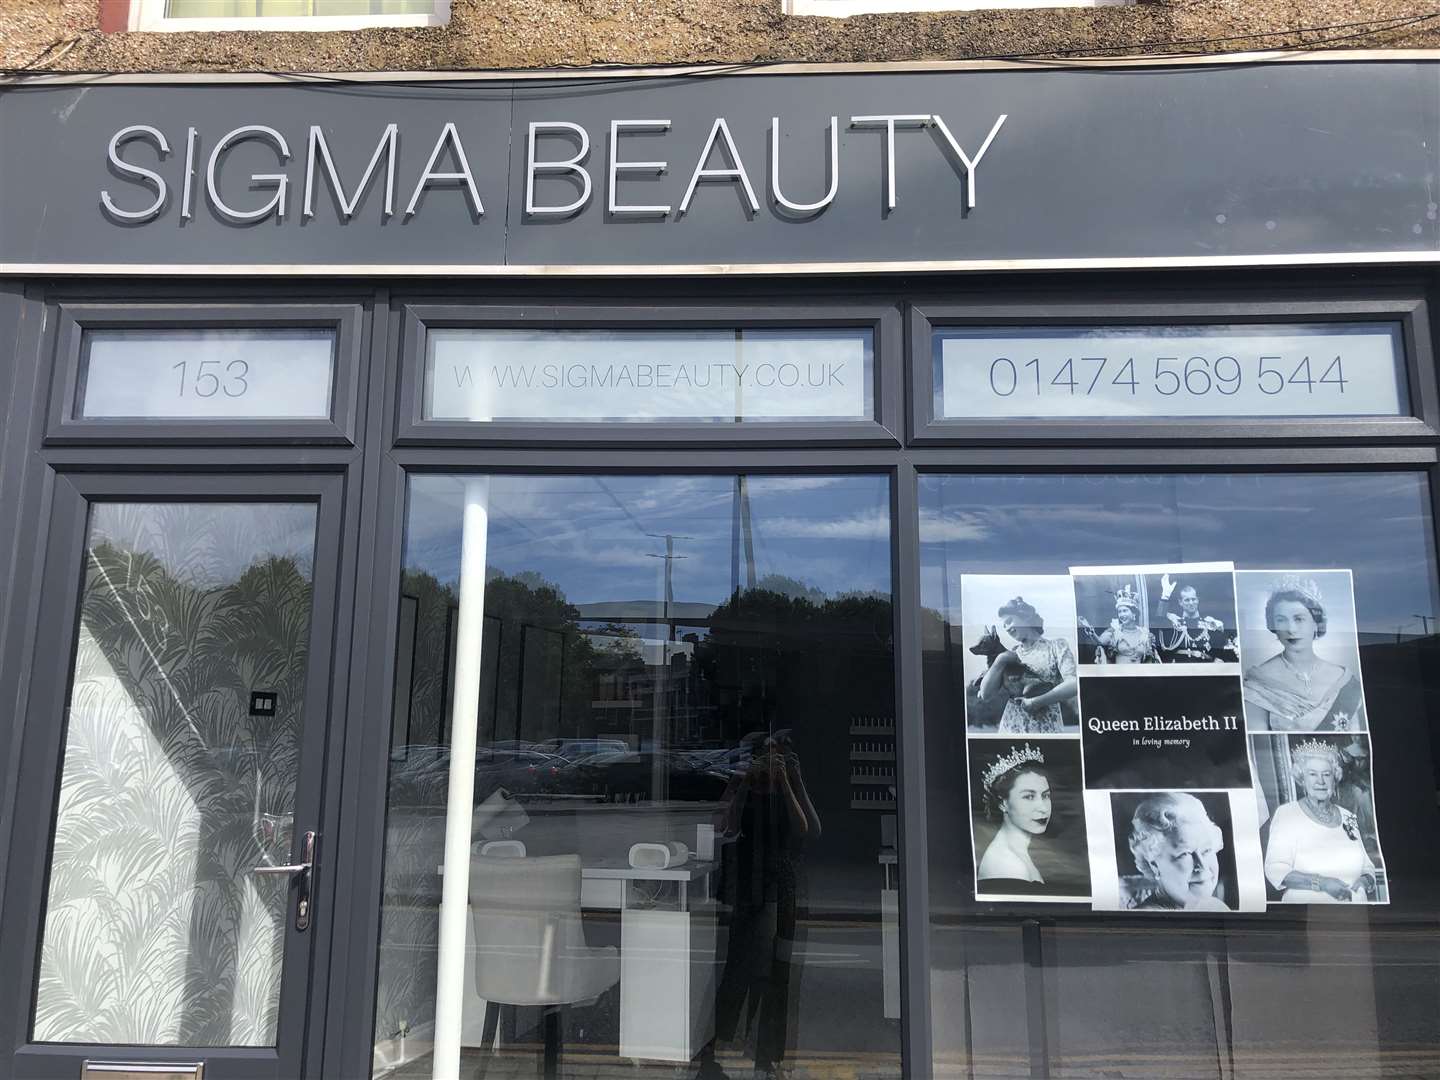 Sigma Beauty has put up pictures of the late monarch